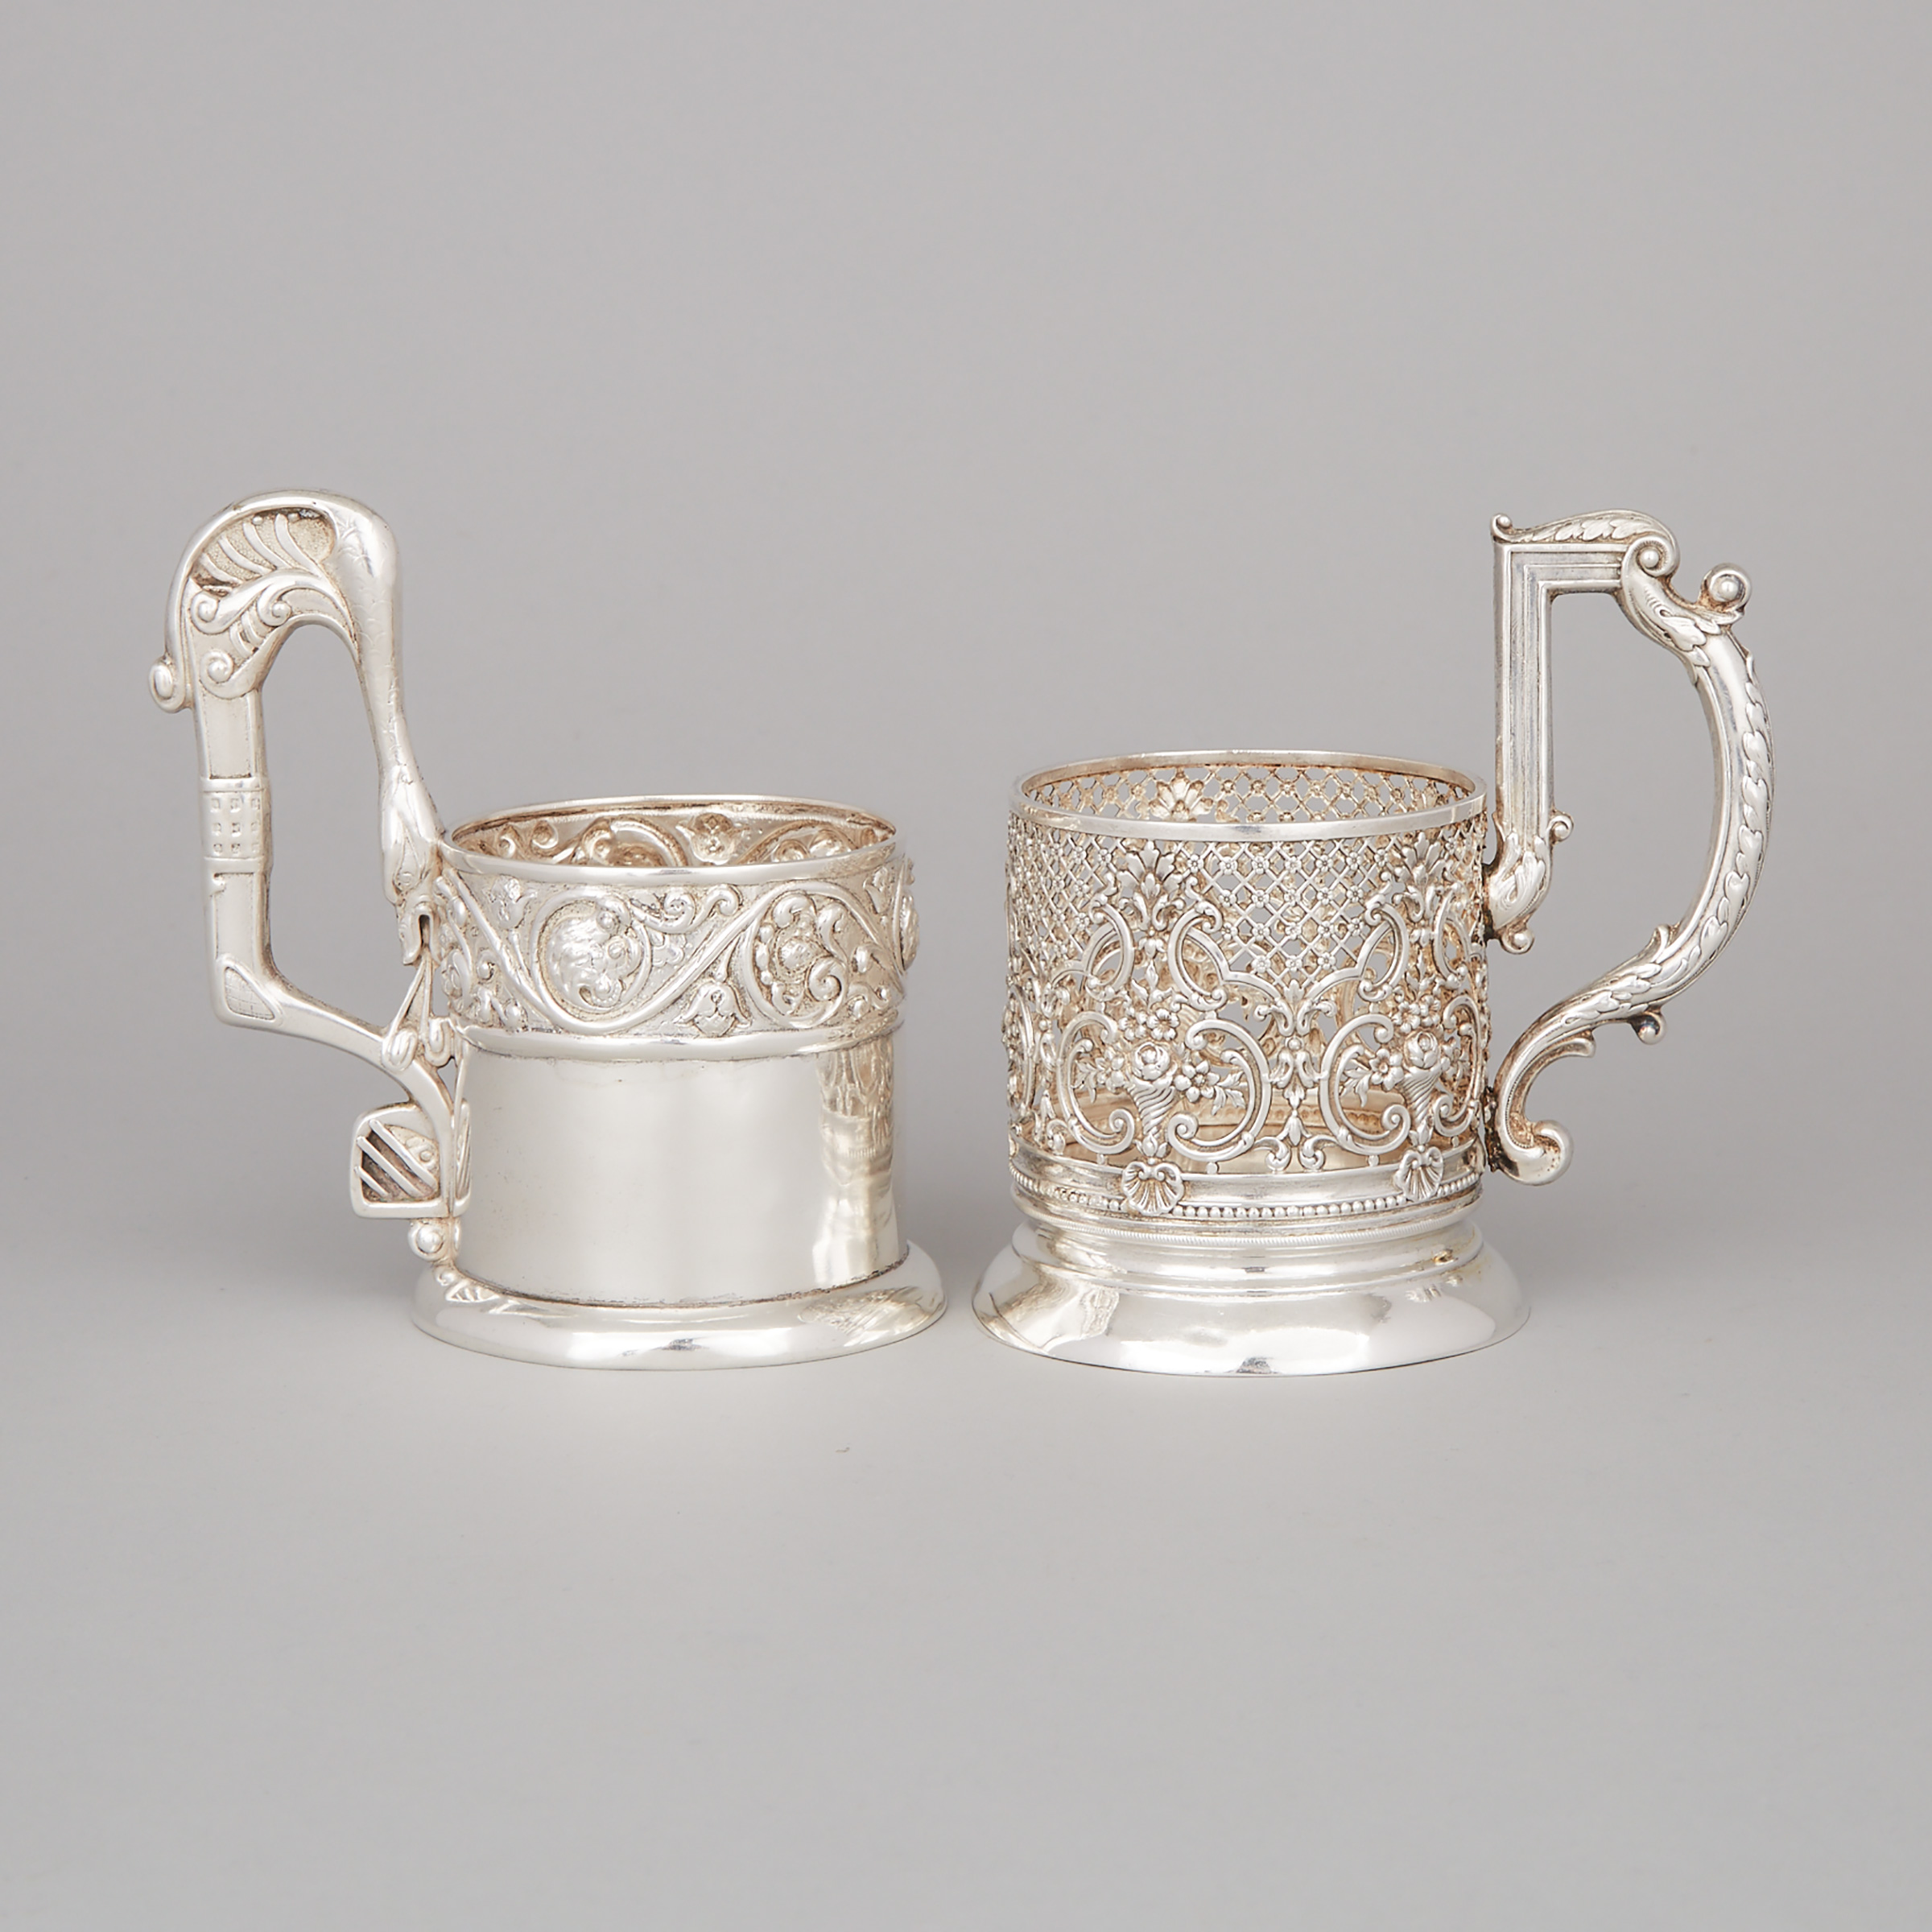 Two Russian Silver Tea Glass Holders, Moscow, c.1908-17